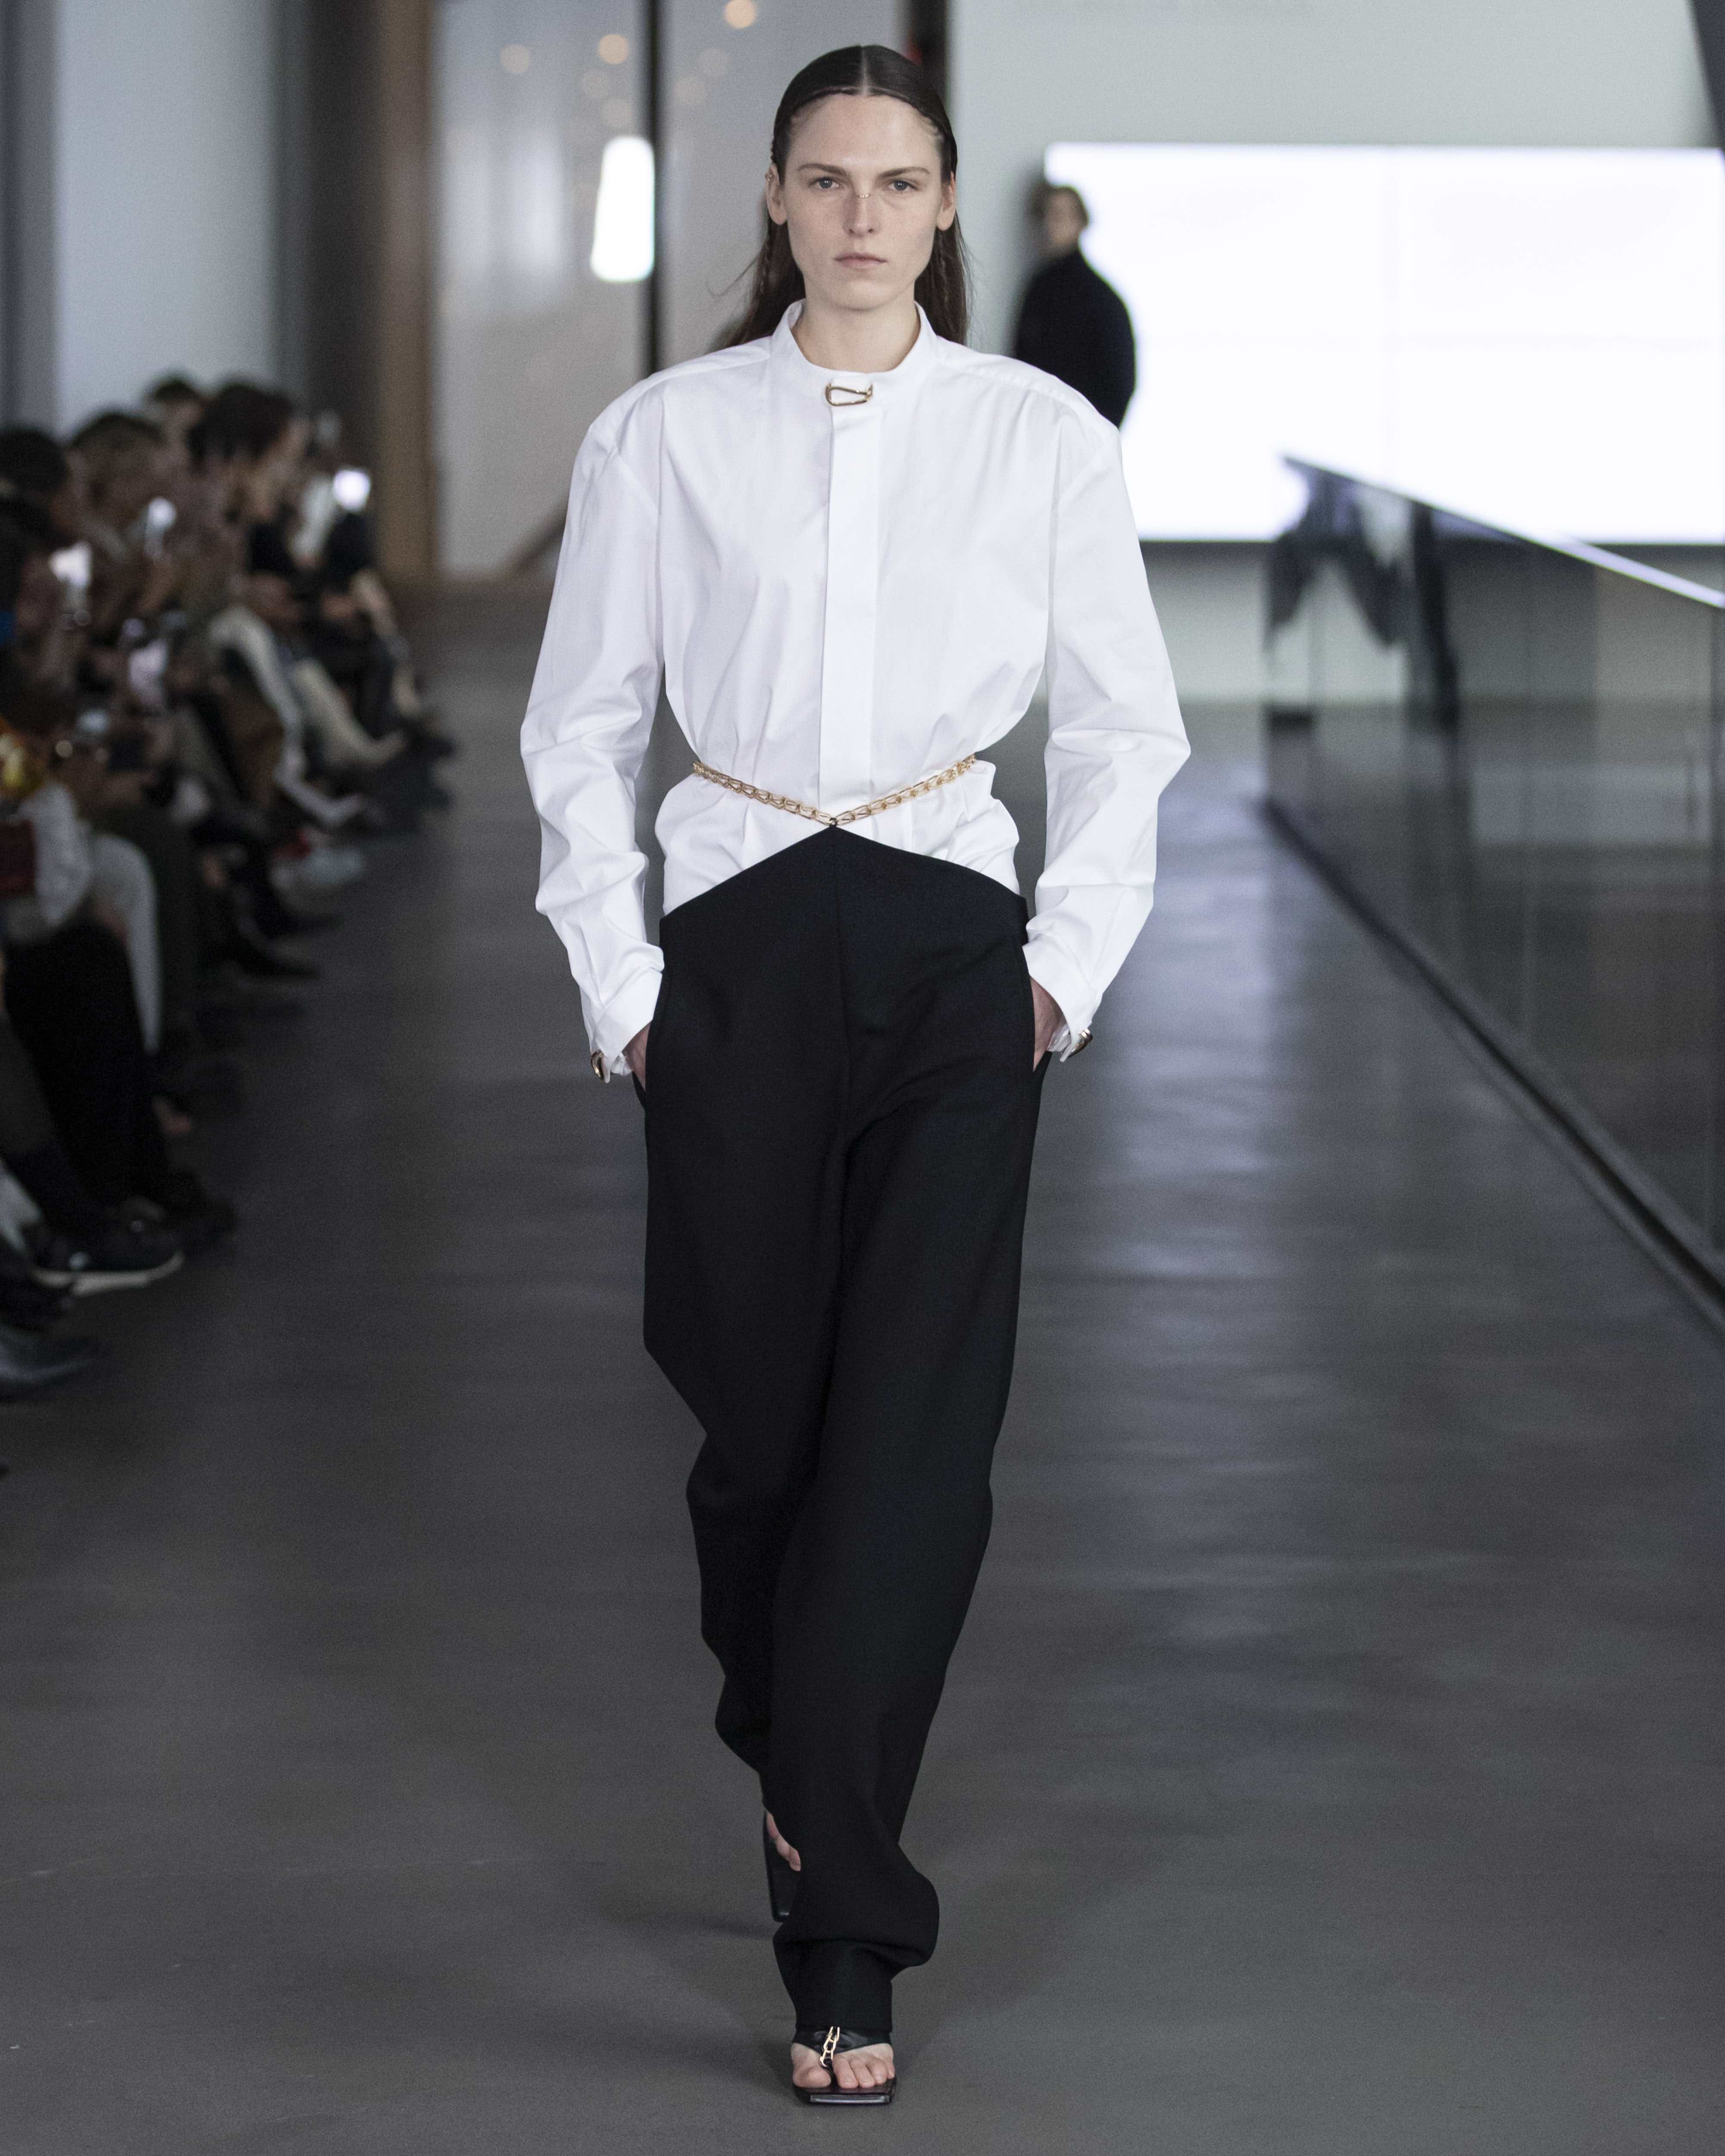 Dion Lee A/W '20 | Office Magazine